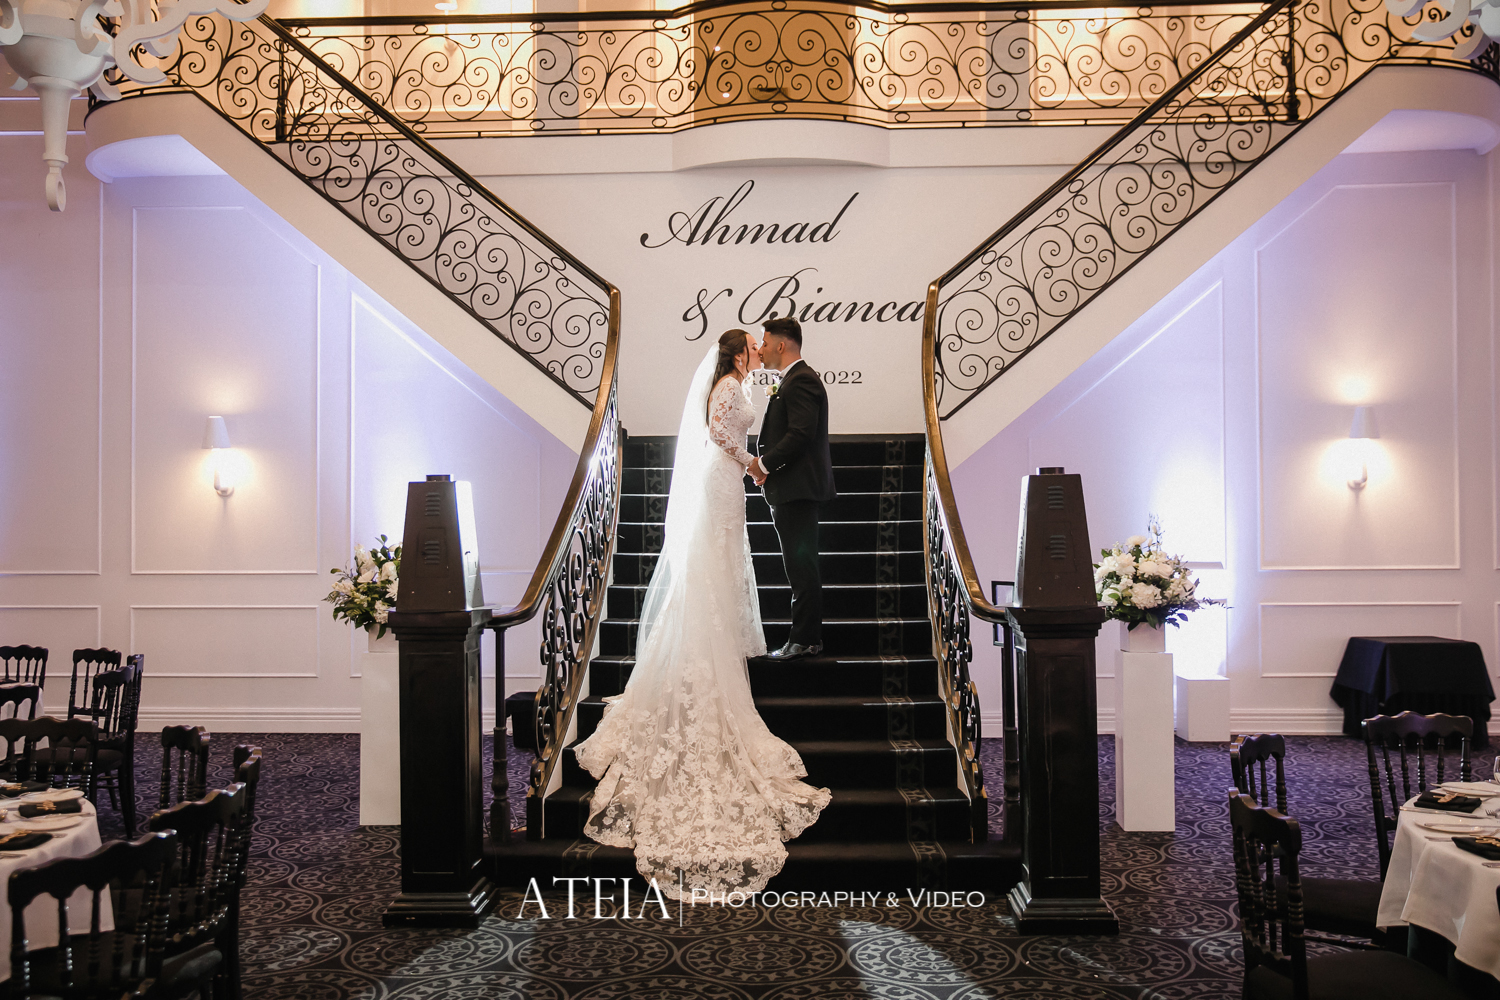 , Bianca and Ahmad&#8217;s wedding photography at Lakeside Receptions captured by ATEIA Photography &#038; Video